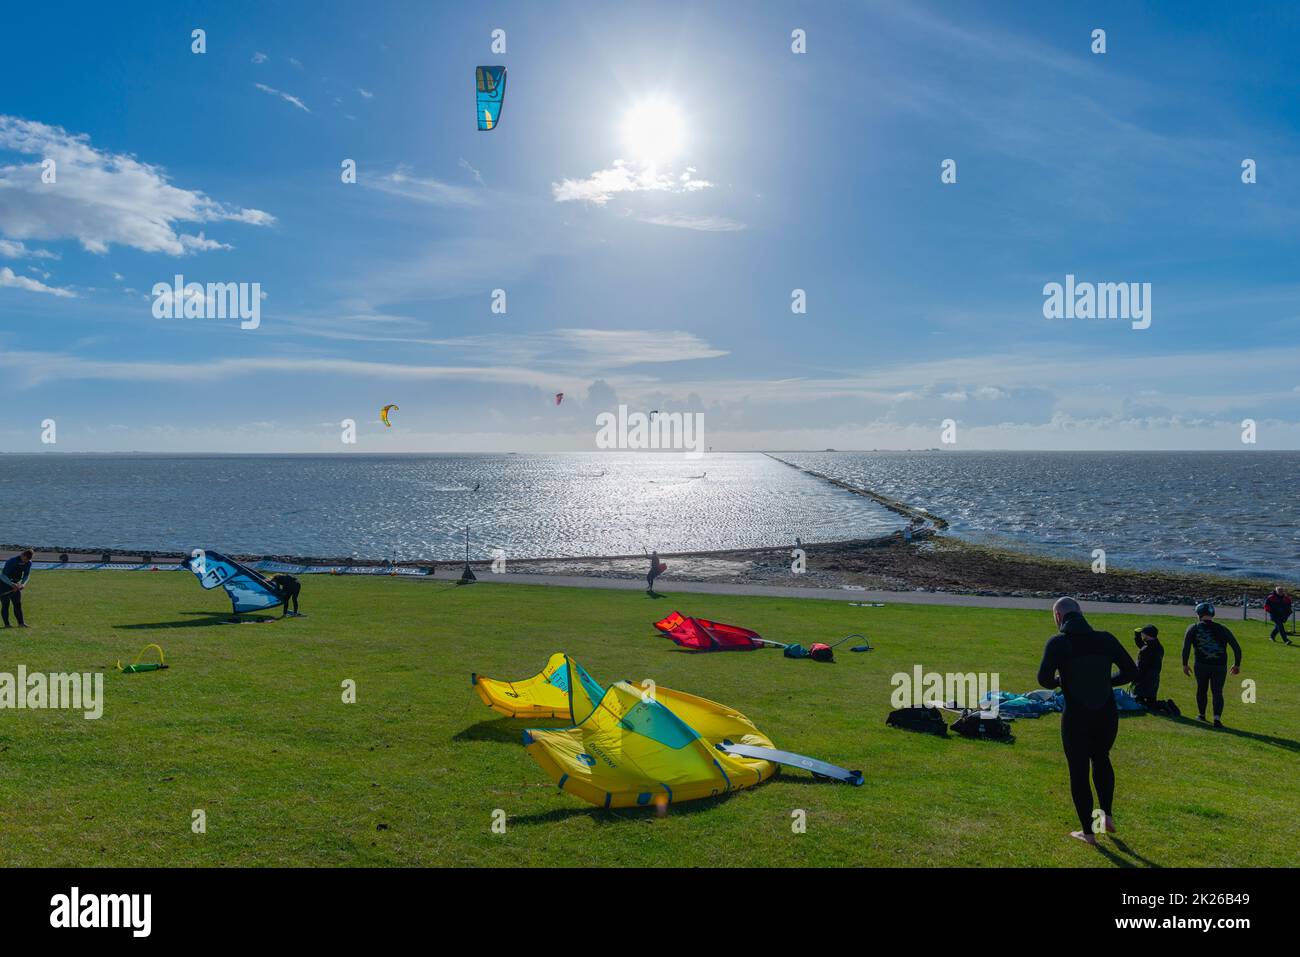 Kitesurfing on the North Sea at Nordstrand, North Frisia, Schleswig-Holstein, Northern Germany, Central Europe Stock Photo